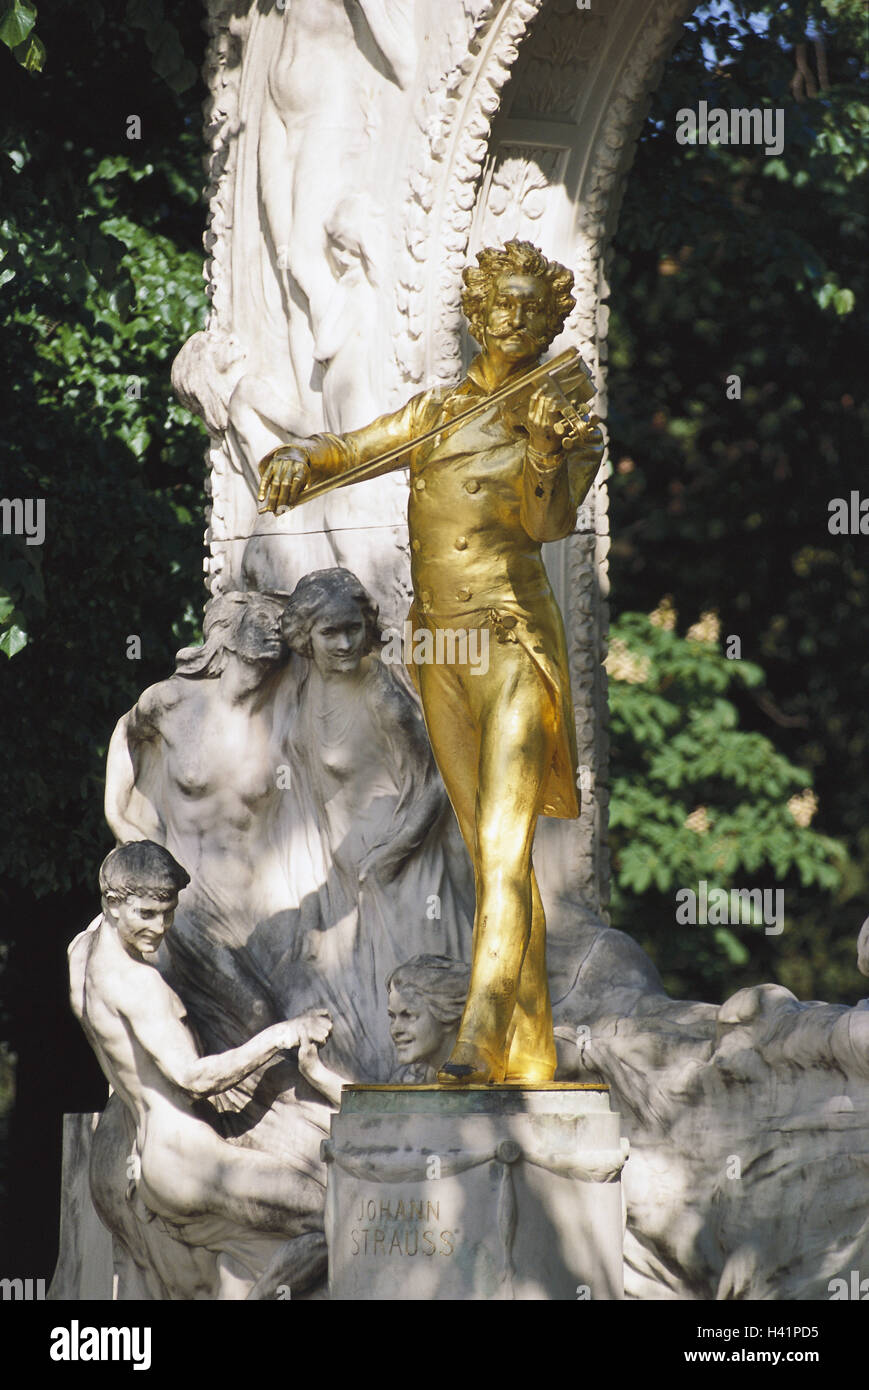 Austria, Vienna, town park, Johann, Strauss of monument, Europe, capital, town, freeze frame, composer, Johann Strauss's monument, waltz king, in 1825-1899, statue, gilds, art, sculpture, culture, place of interest, recollection, icon, music, operas, oper Stock Photo